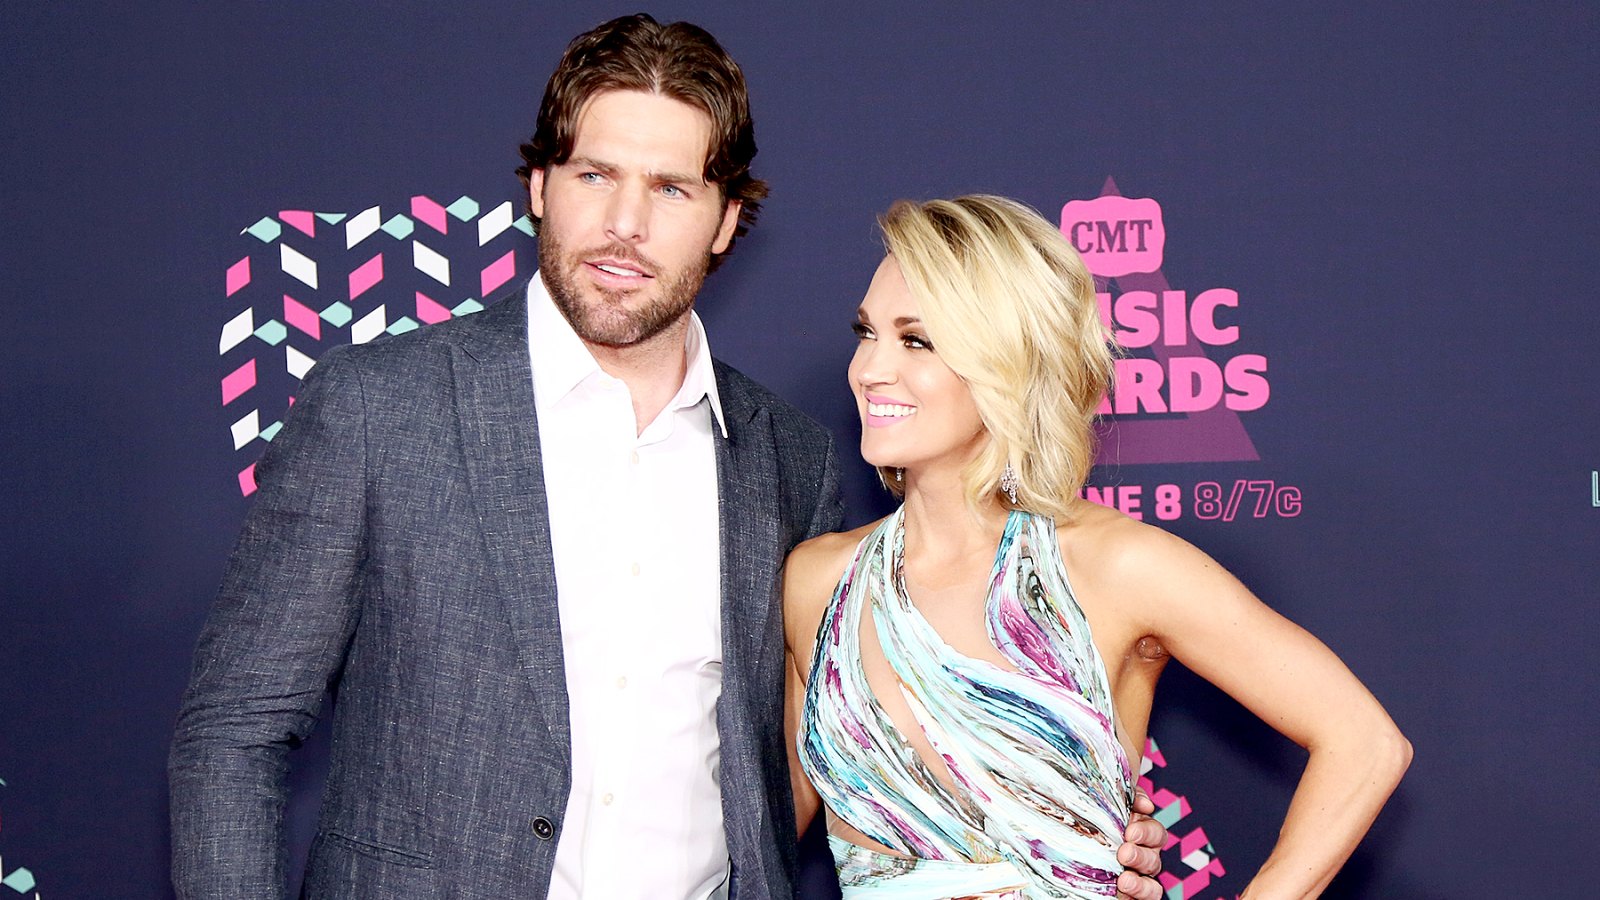 Carrie Underwood Reveals Hubby Mike Fisher's Rarest Fine Quality